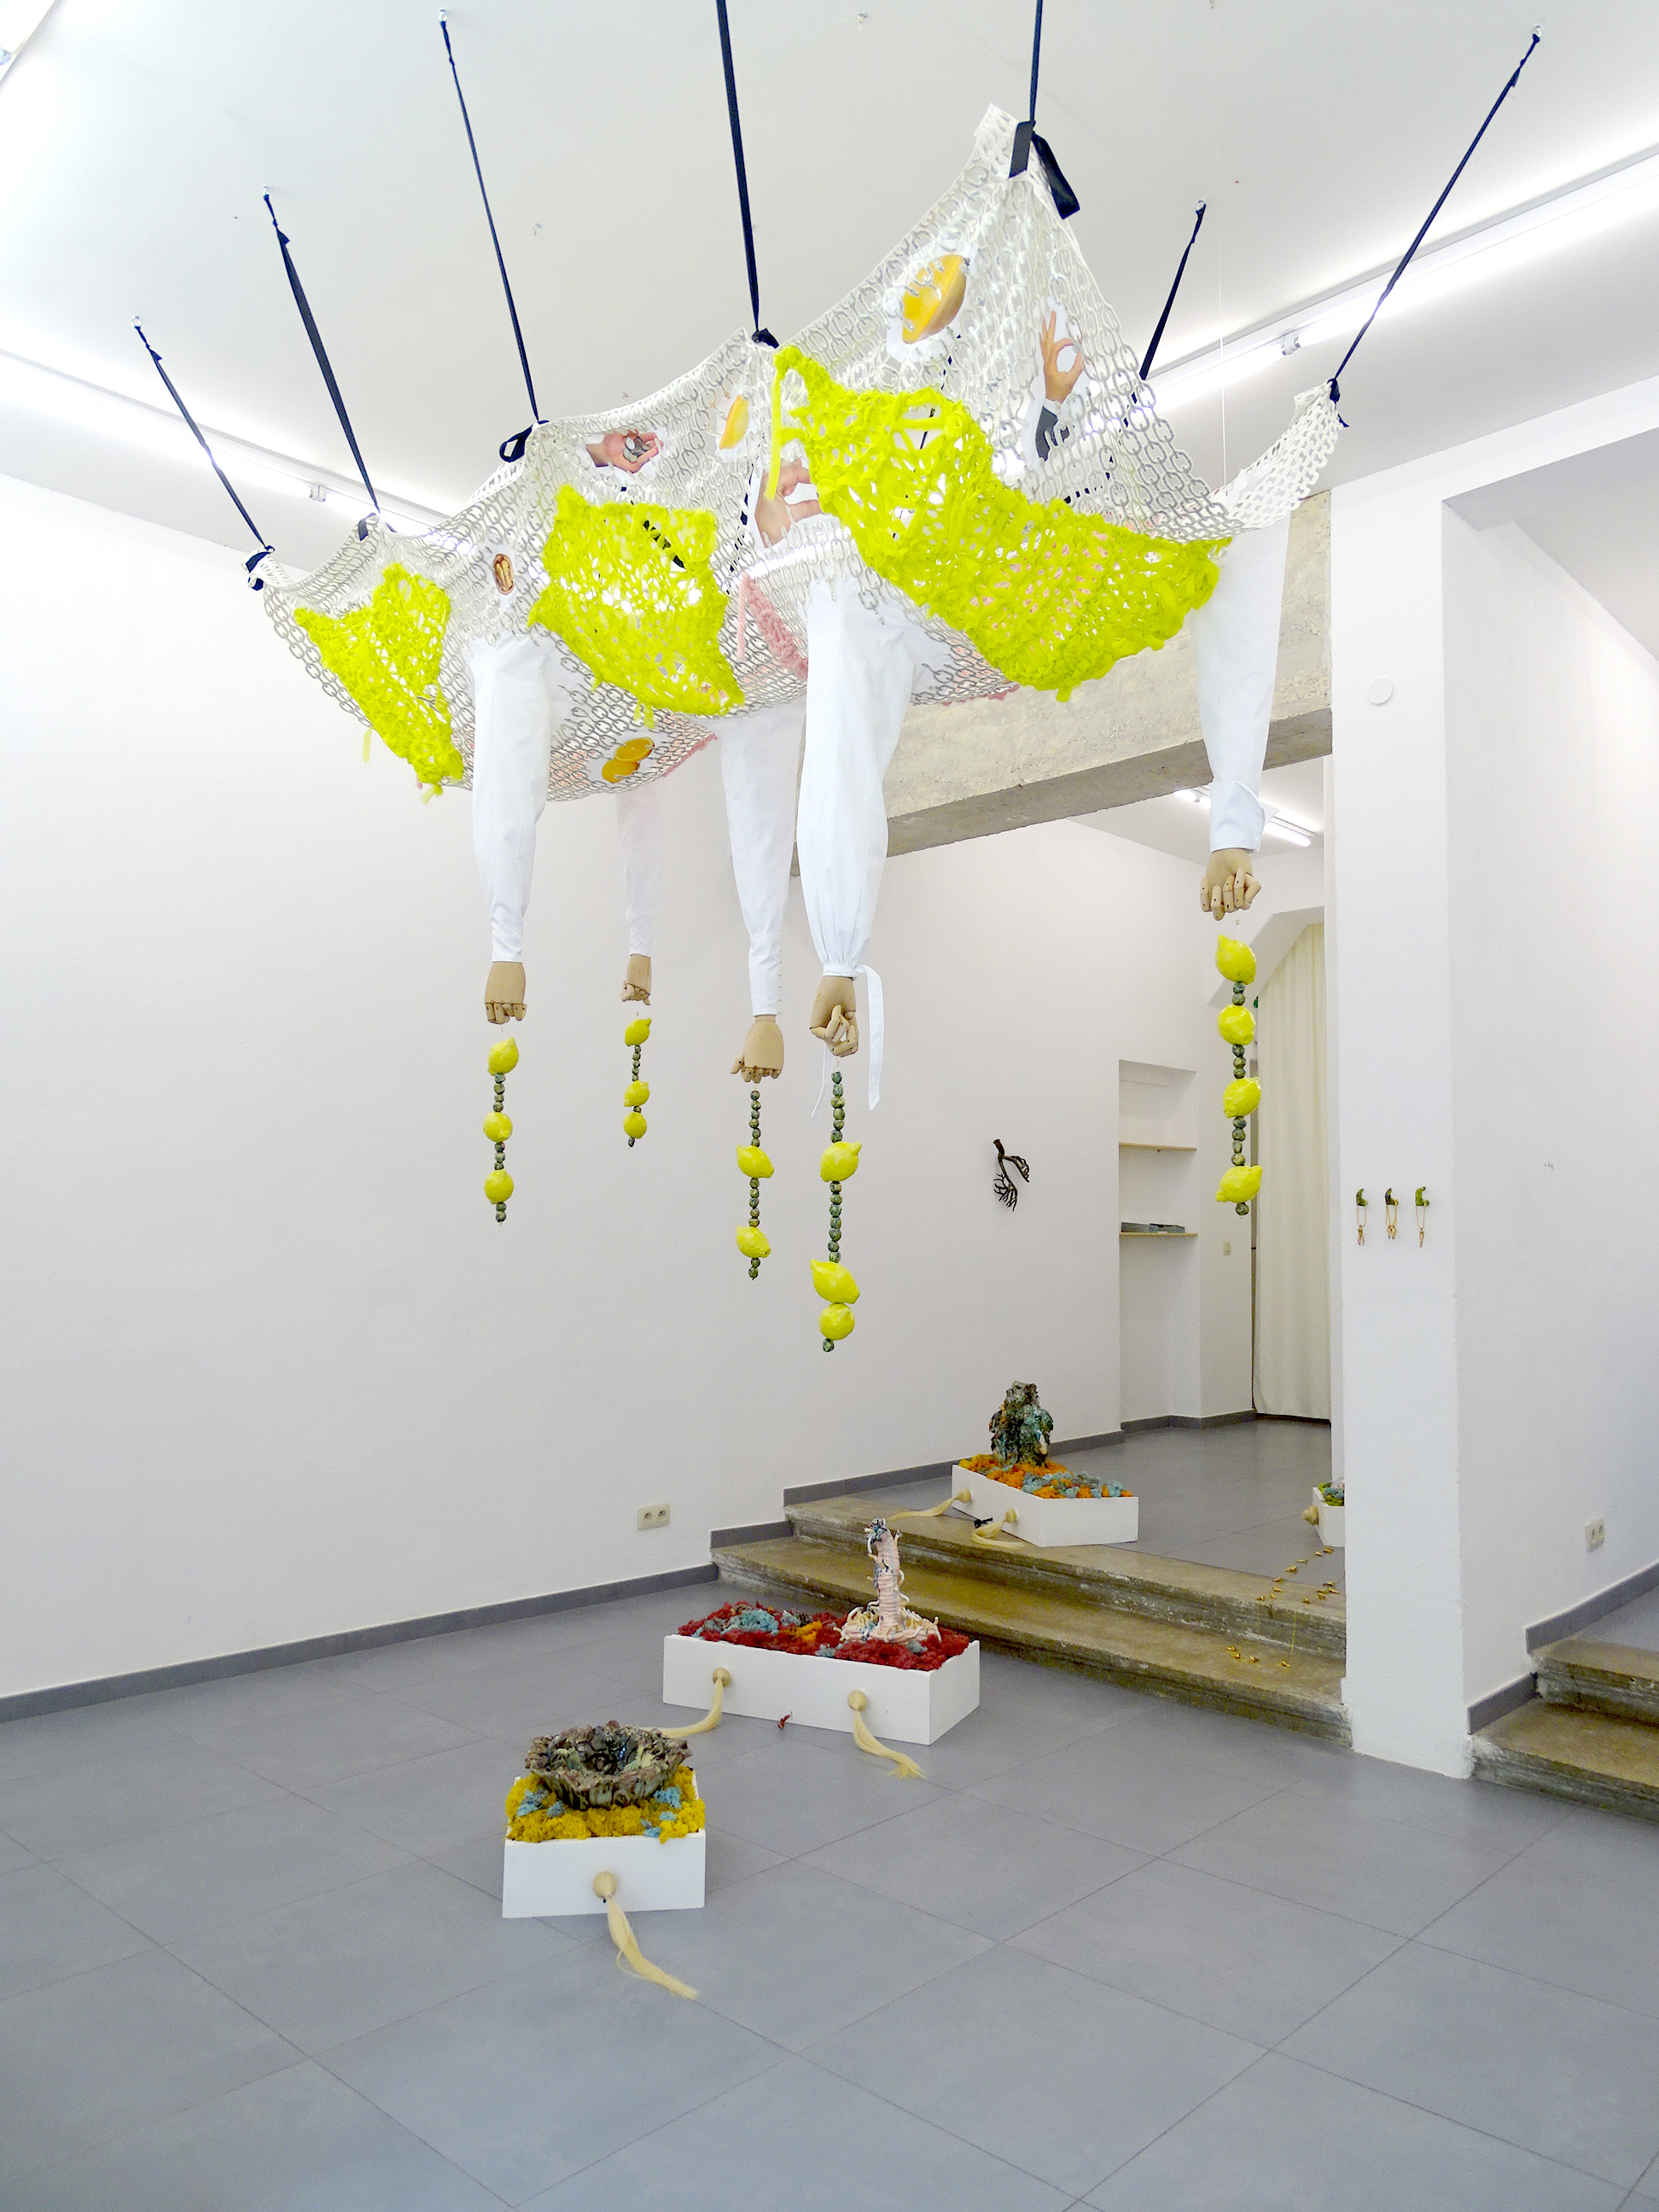 (01) Of All the Things I’ve Lost Proudick (Lindsey Mendick & Paloma Proudfoot) Installation view Hannah Barry Gallery at Ballon Rouge Club Brussels 2019  courtesy Hannah Barry Gallery.jpg